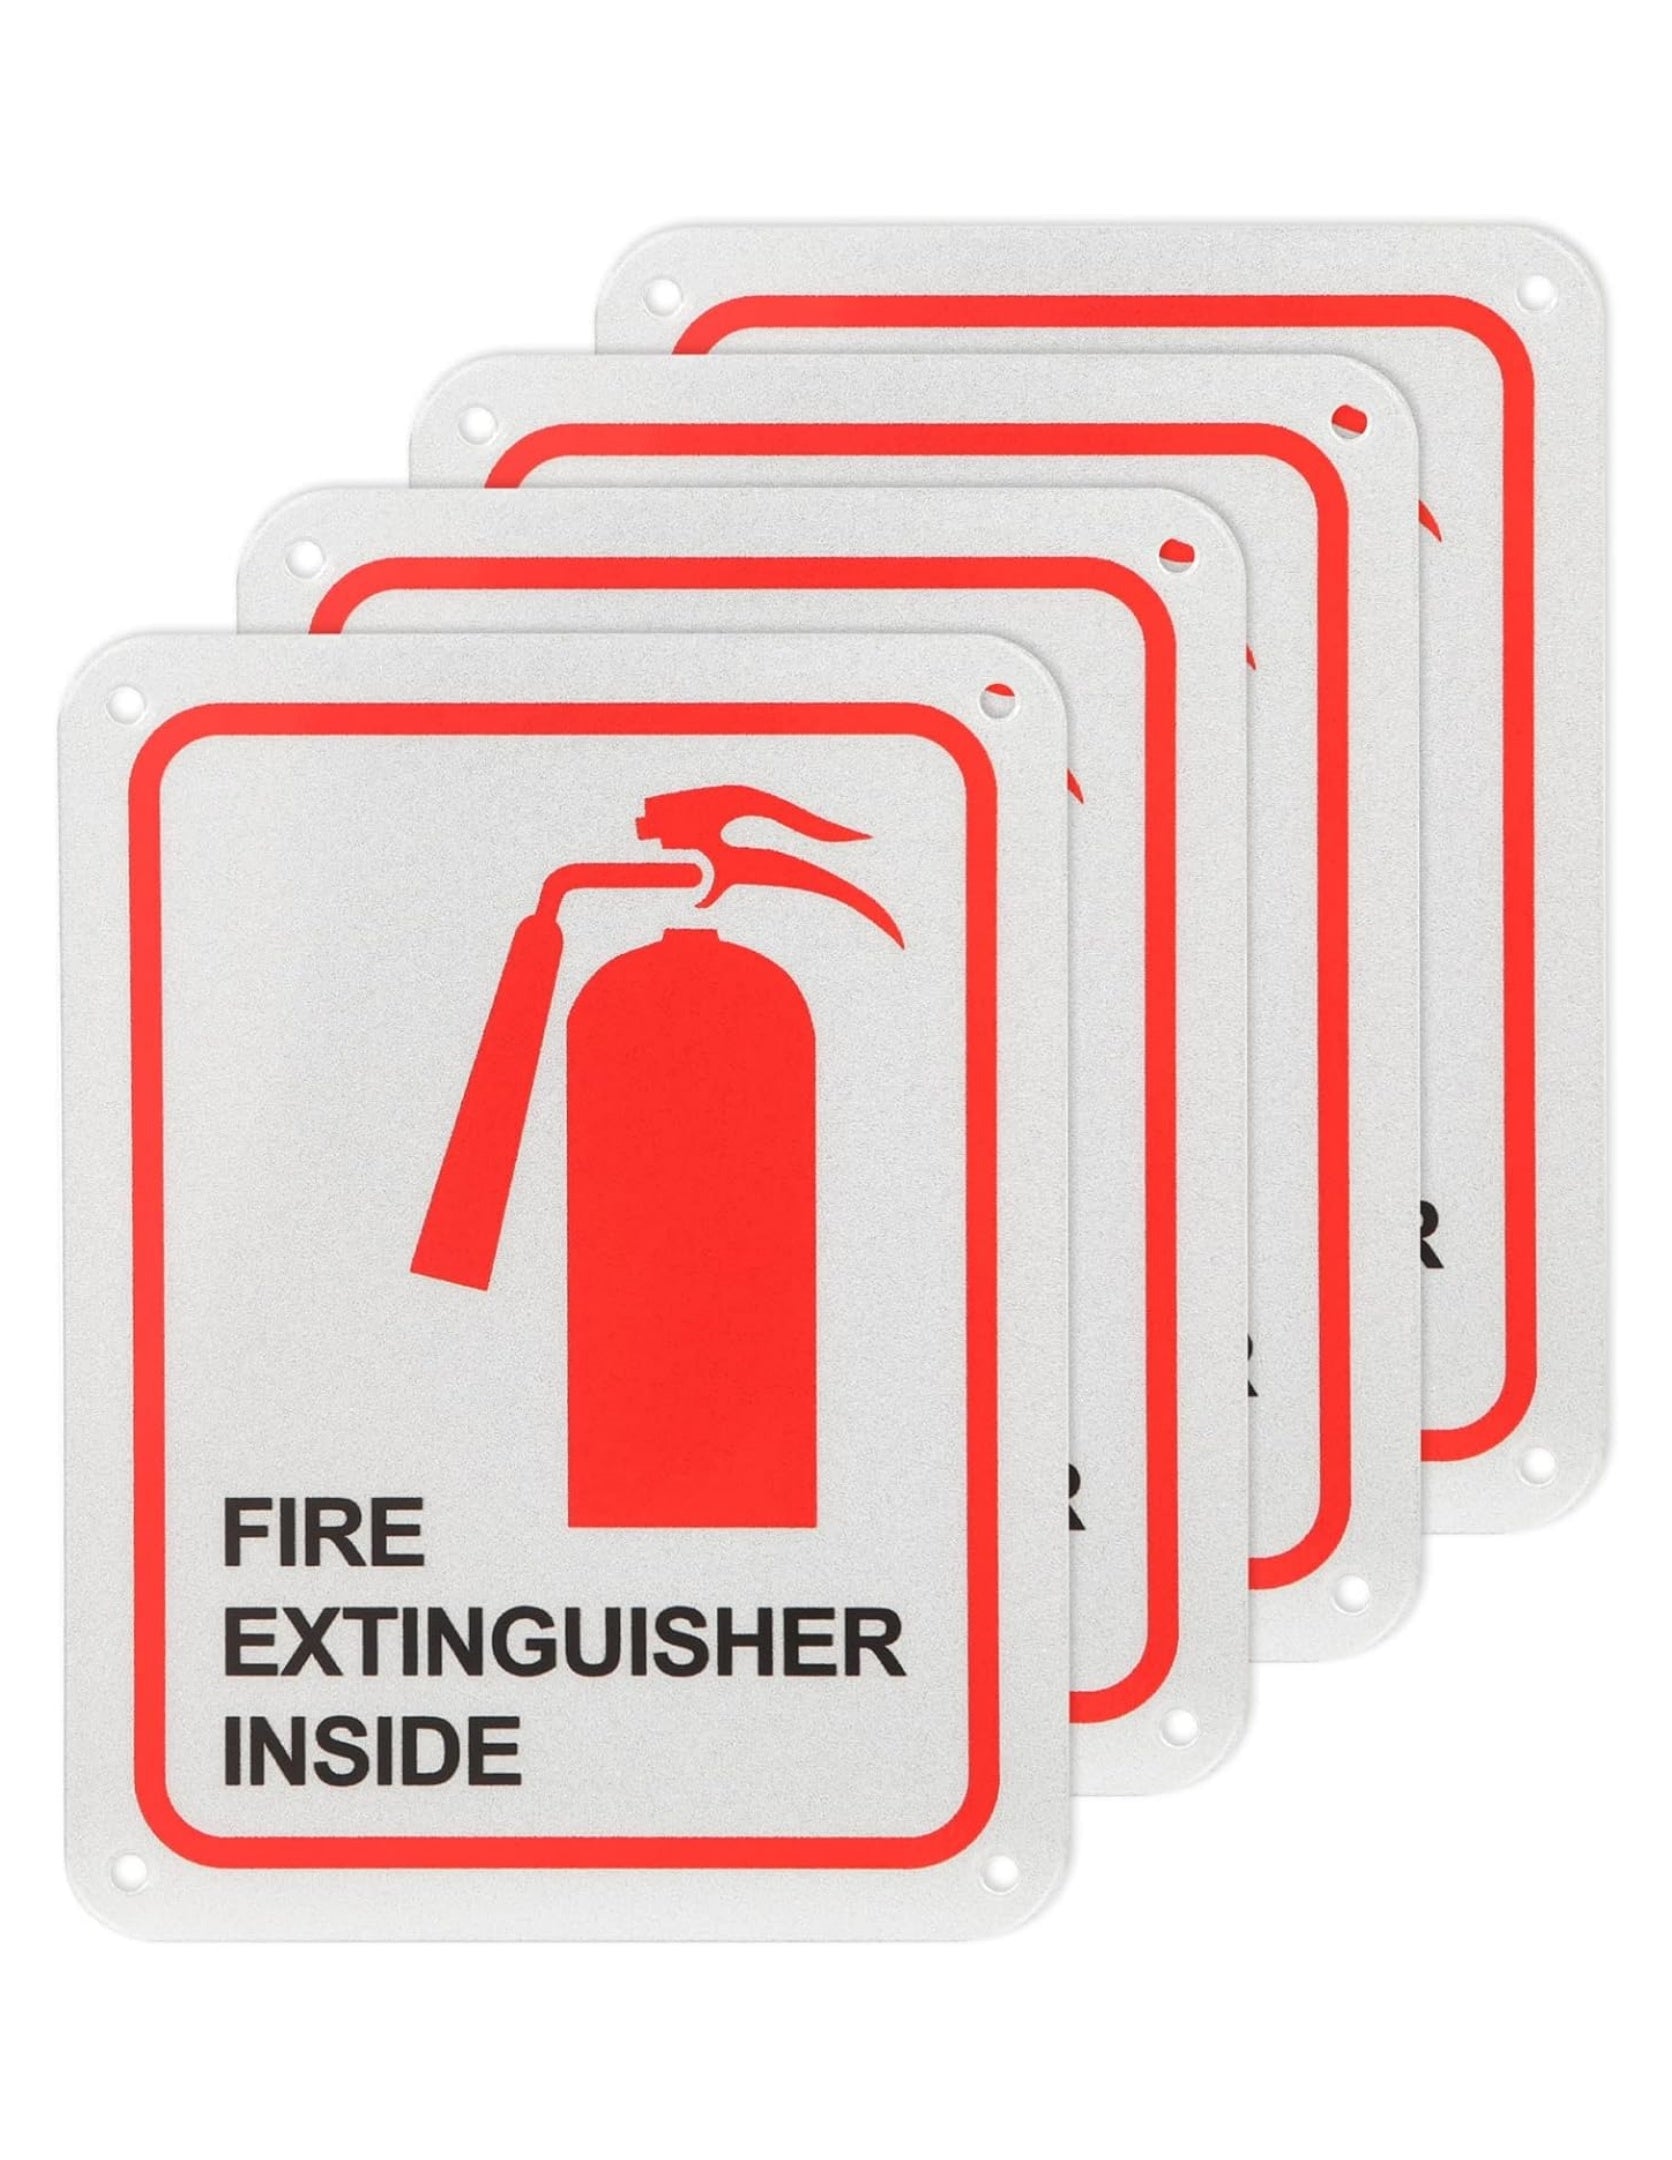 Thten Fire Extinguisher Inside Sign, Fire Safety Sign, 4x5 Inches, Rust Free .040 Aluminum, Fade Resistant, Indoor/Outdoor for Apartment, House, Shop, Office, or School Signs 4 Pack